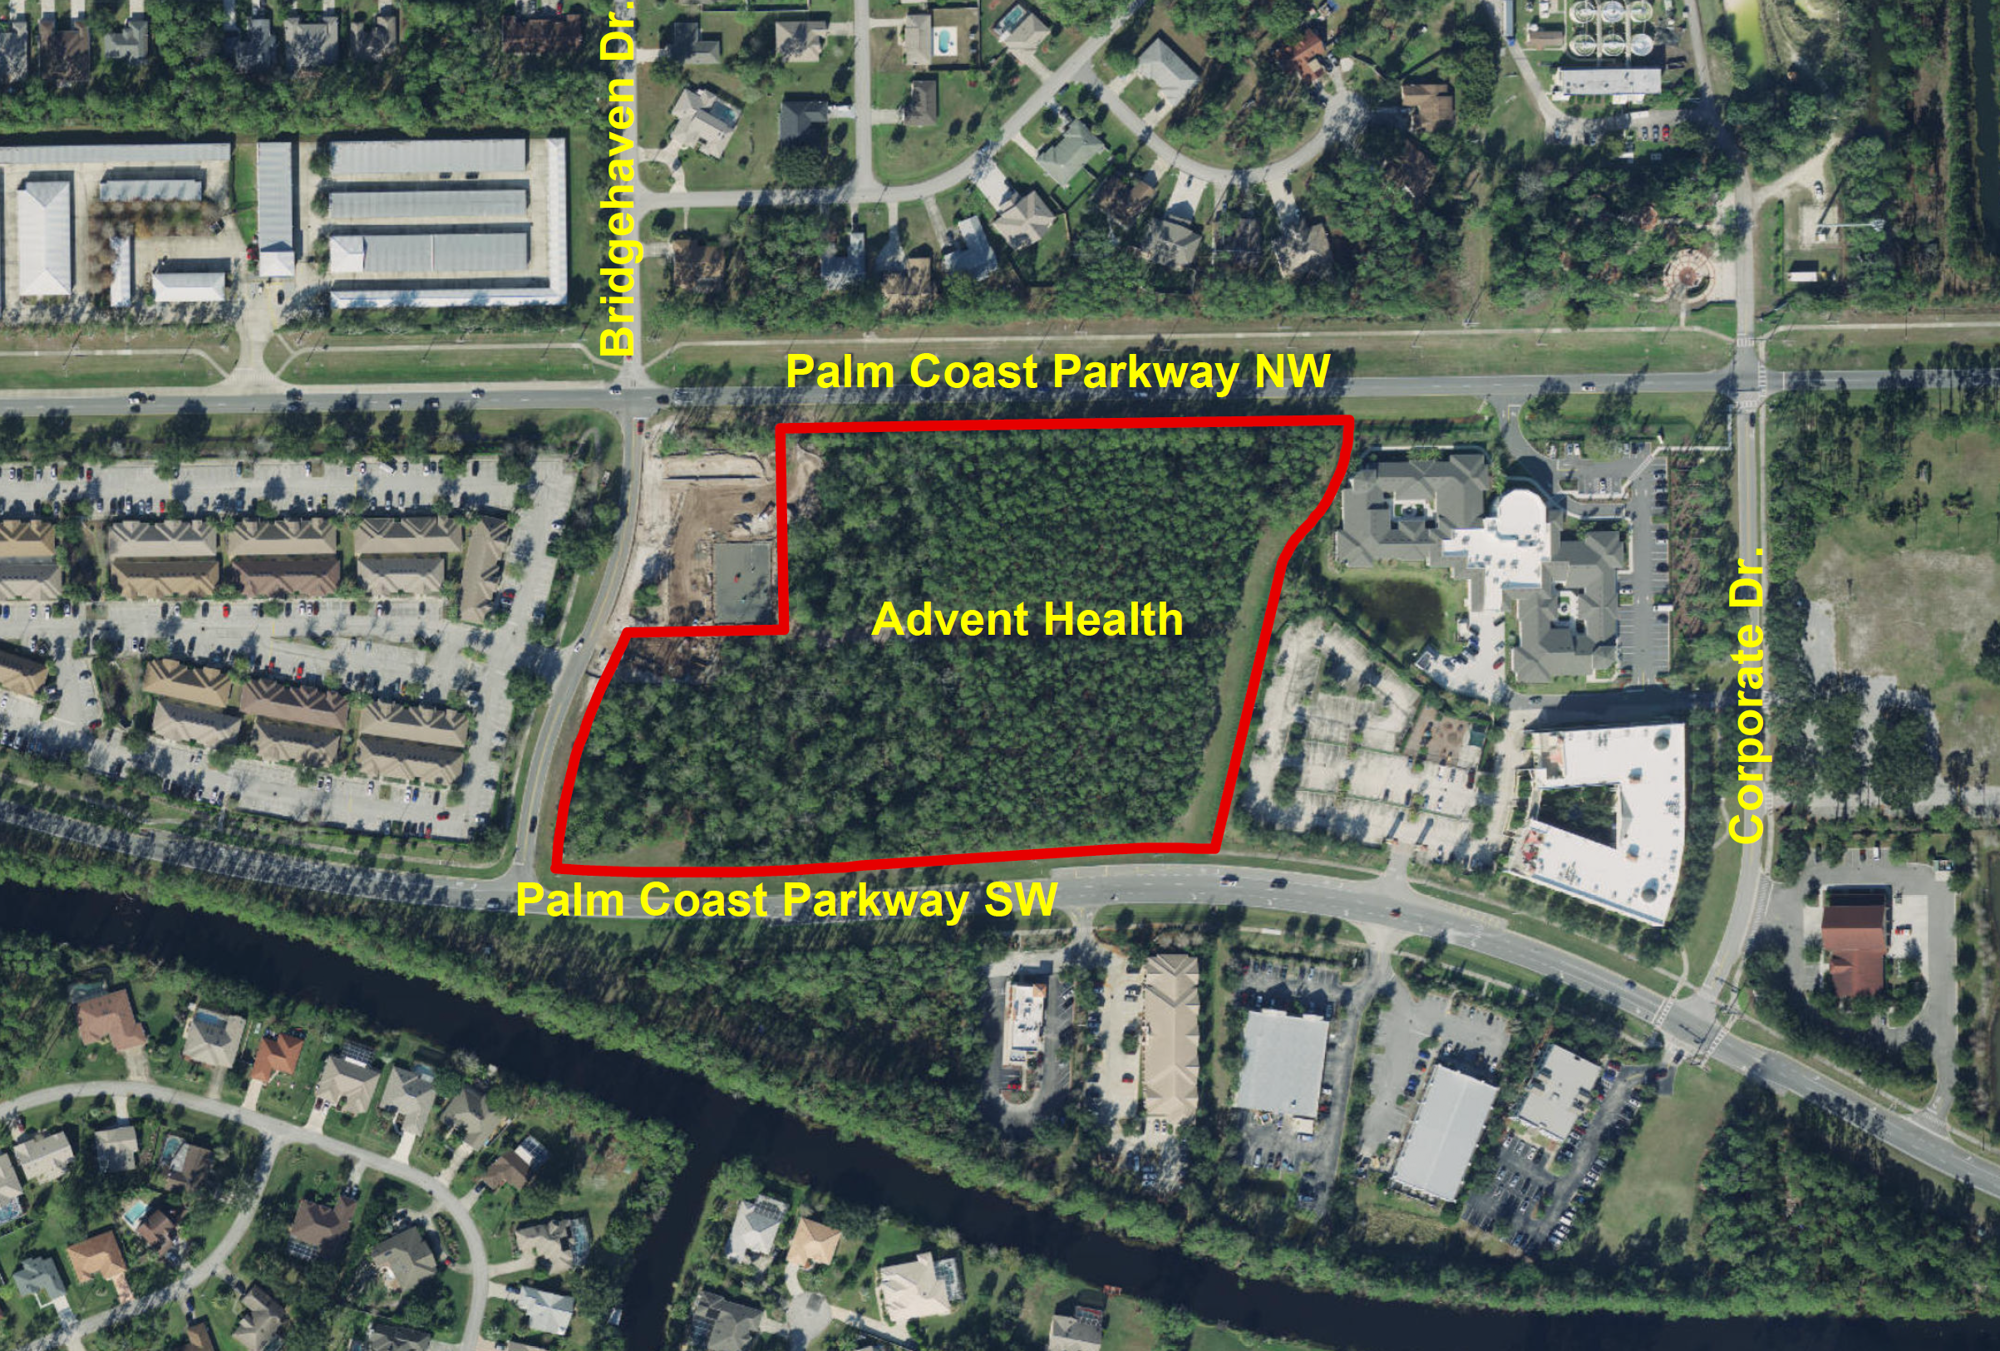 The proposed location of the new hospital. Image courtesy of the city of Palm Coast.